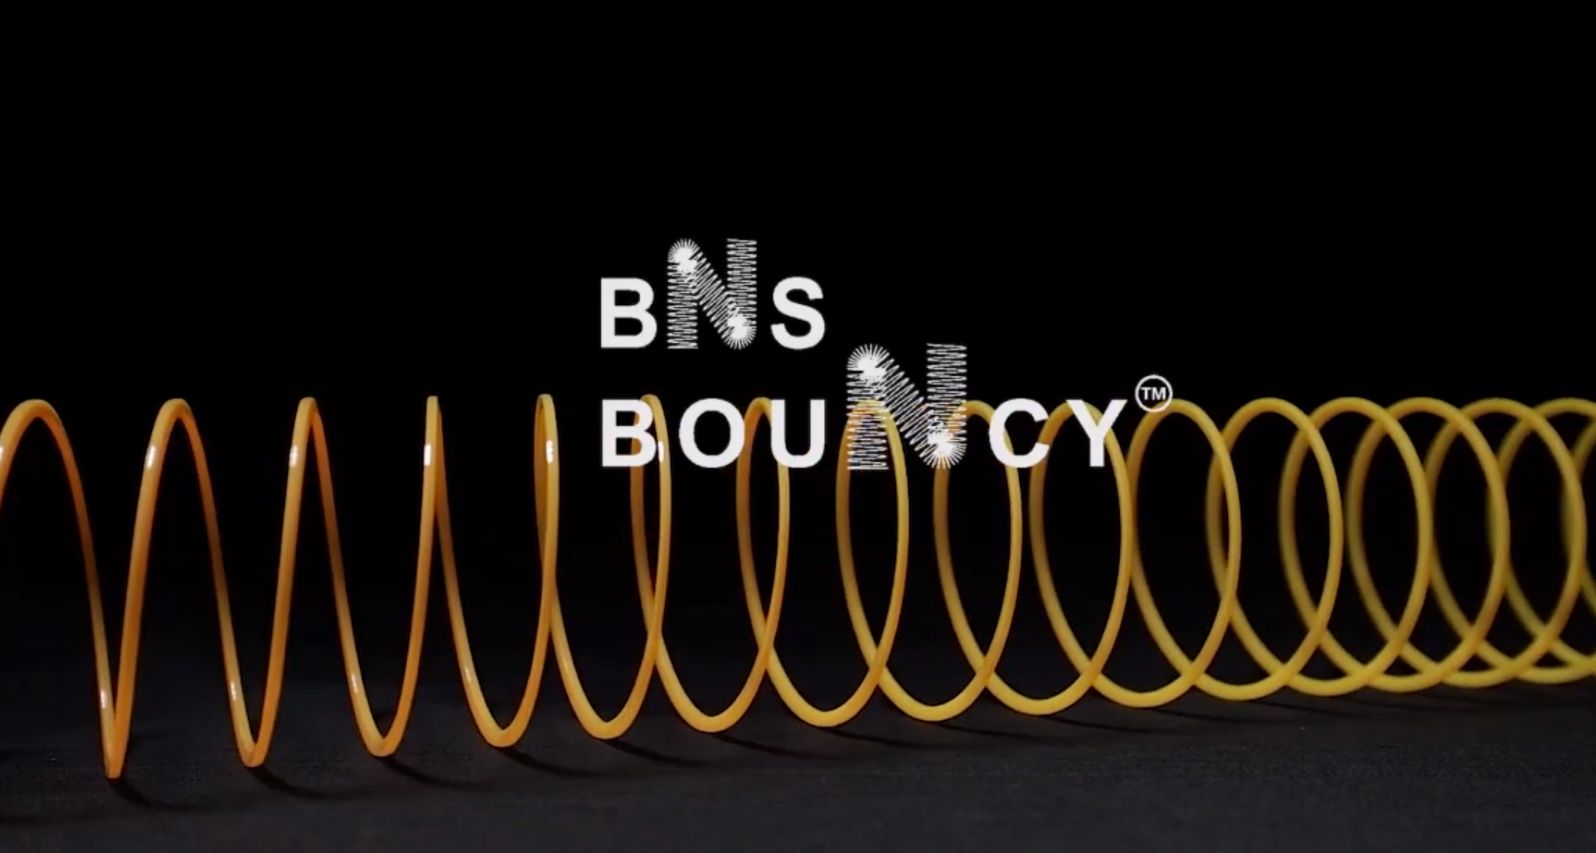 About BNS Bouncy Technology